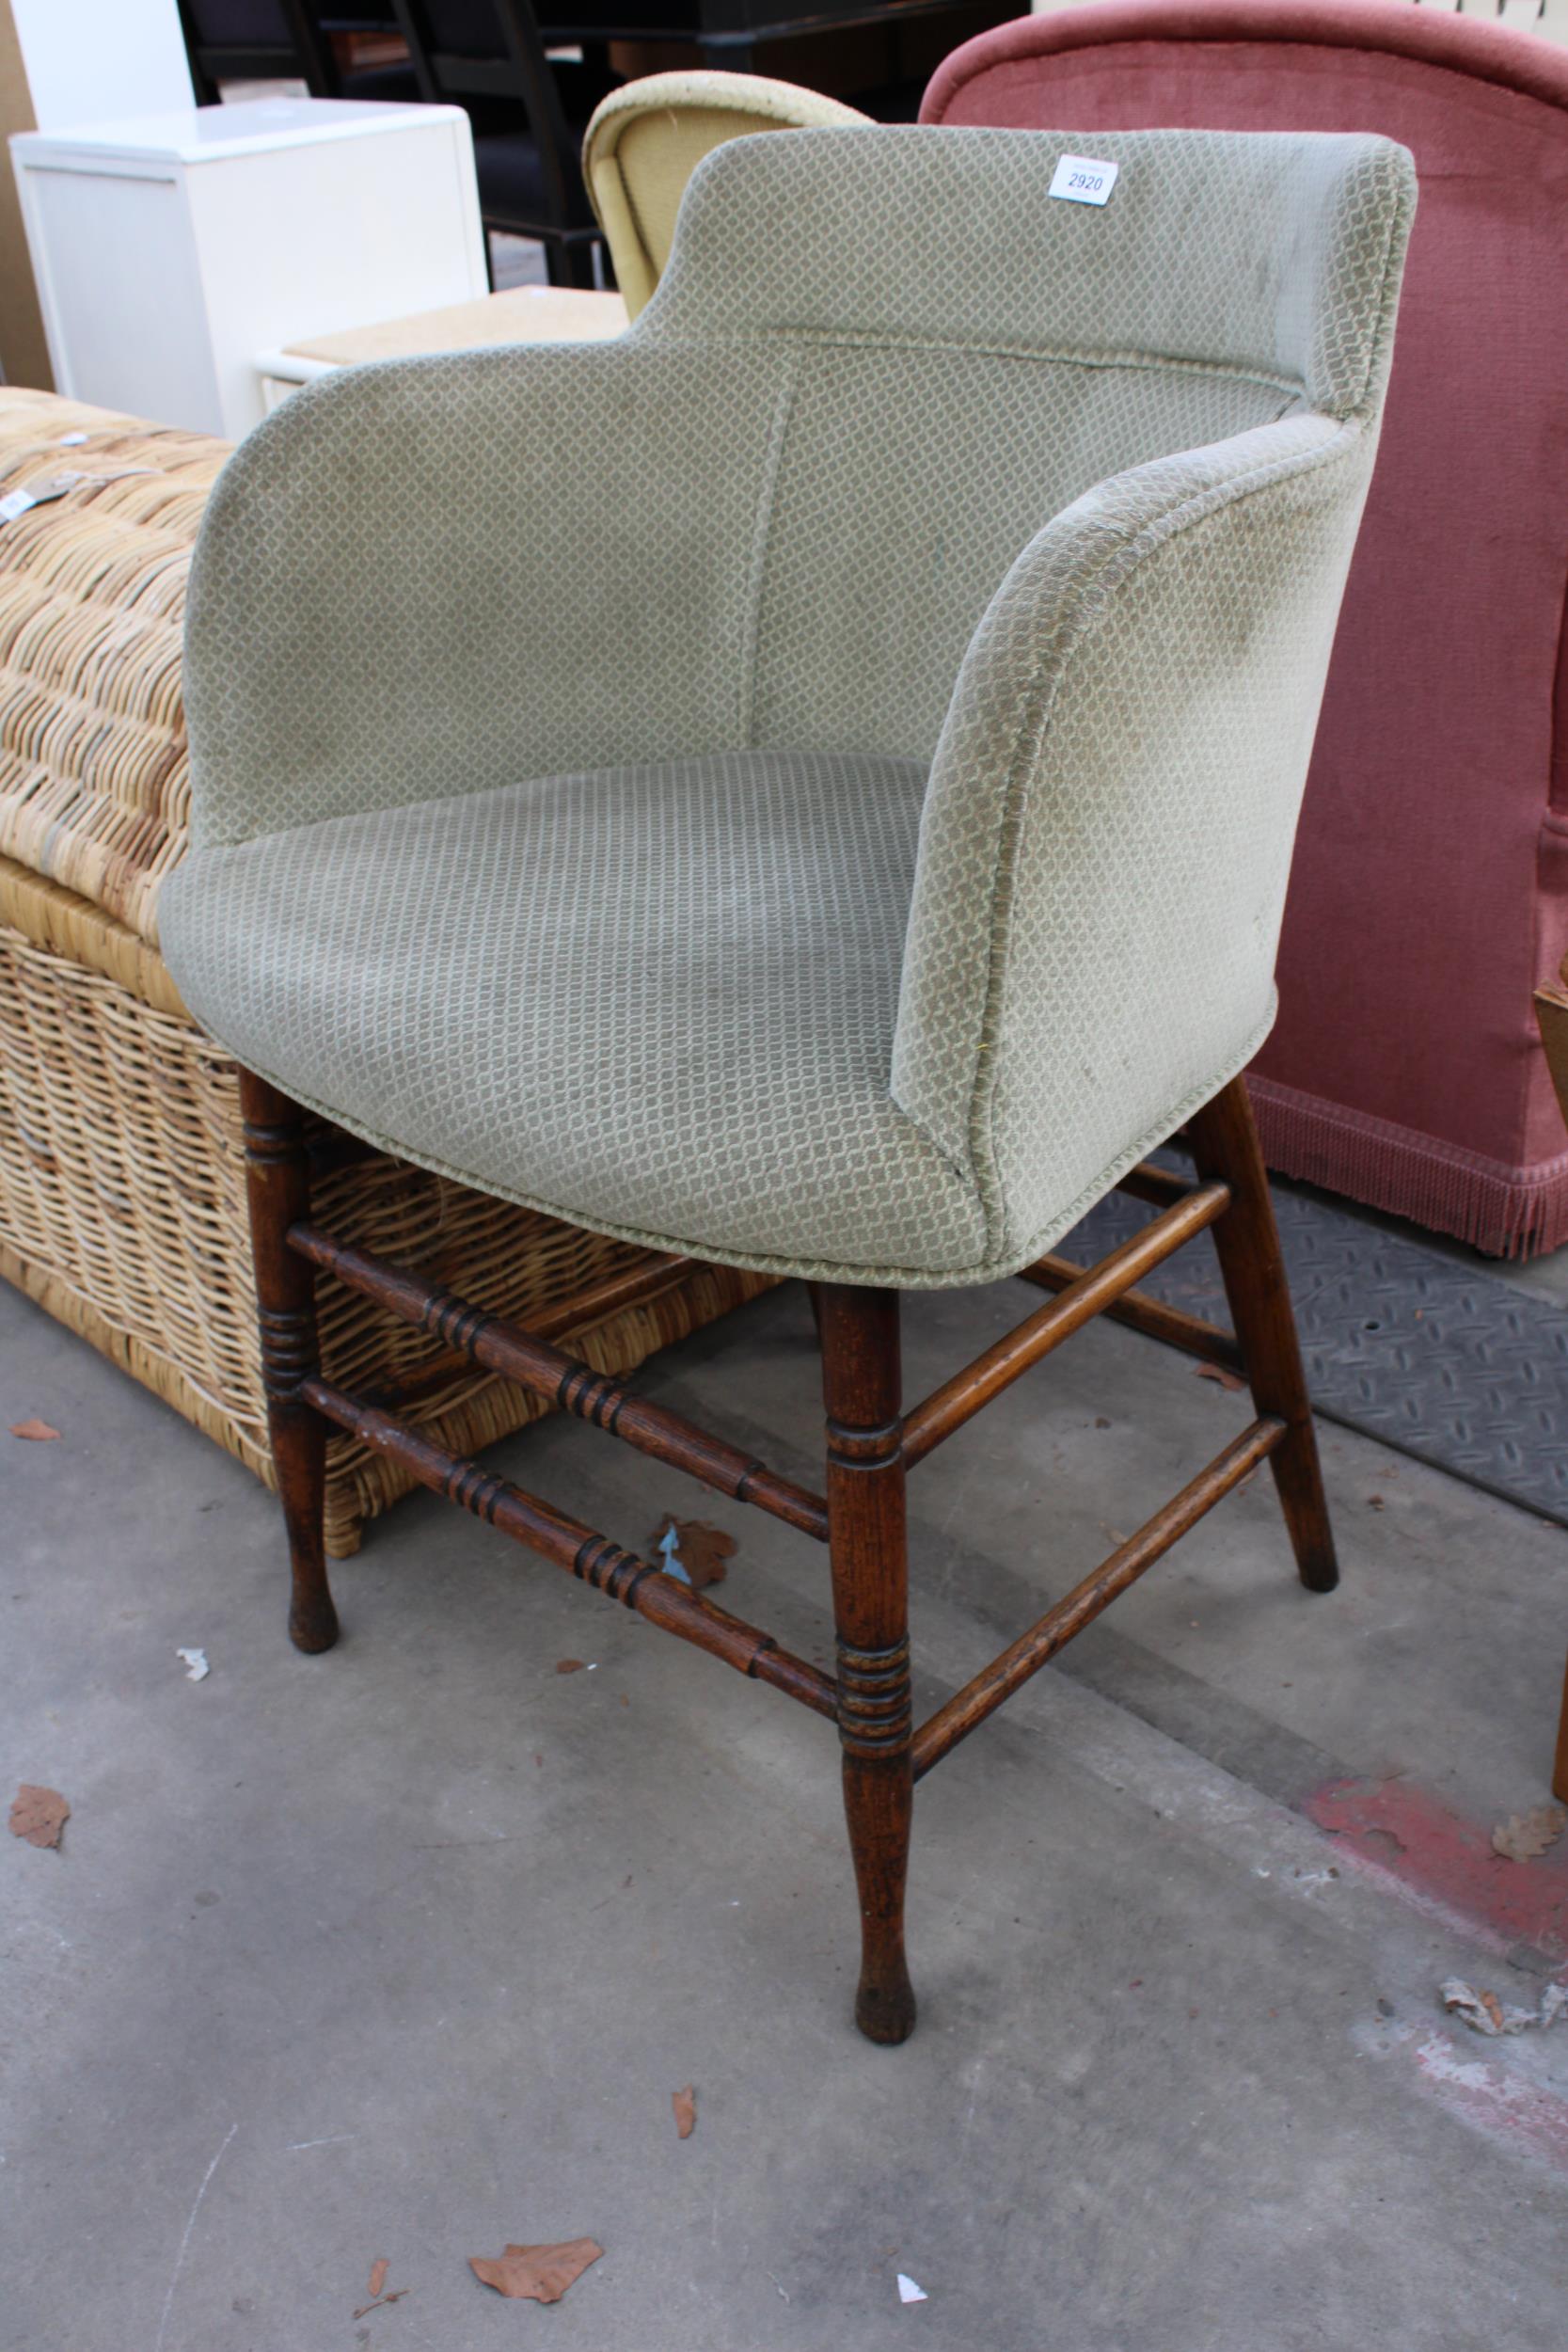 AN EDWARDIAN TUB CHAIR WITH UPHOLSTERED UPPER SECTION ON TURNED ELM BASE - Image 2 of 2